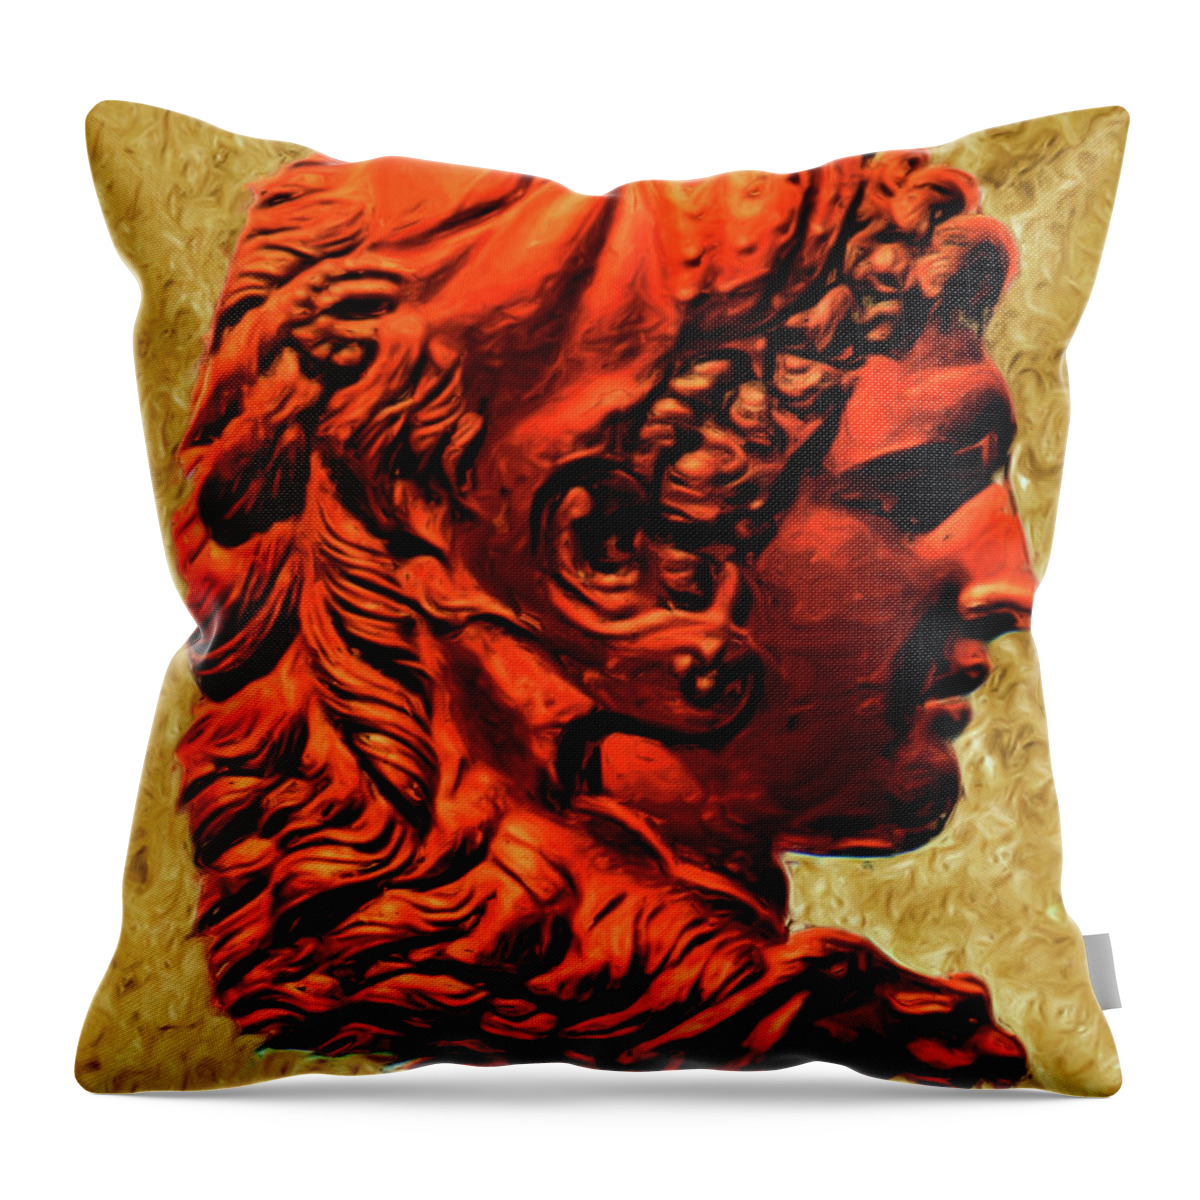 Troy Capeton Alexander The Great Profile Modern Macedonian European Culture General Victory Throw Pillow featuring the painting Reverse Profile of Alexander by Troy Caperton